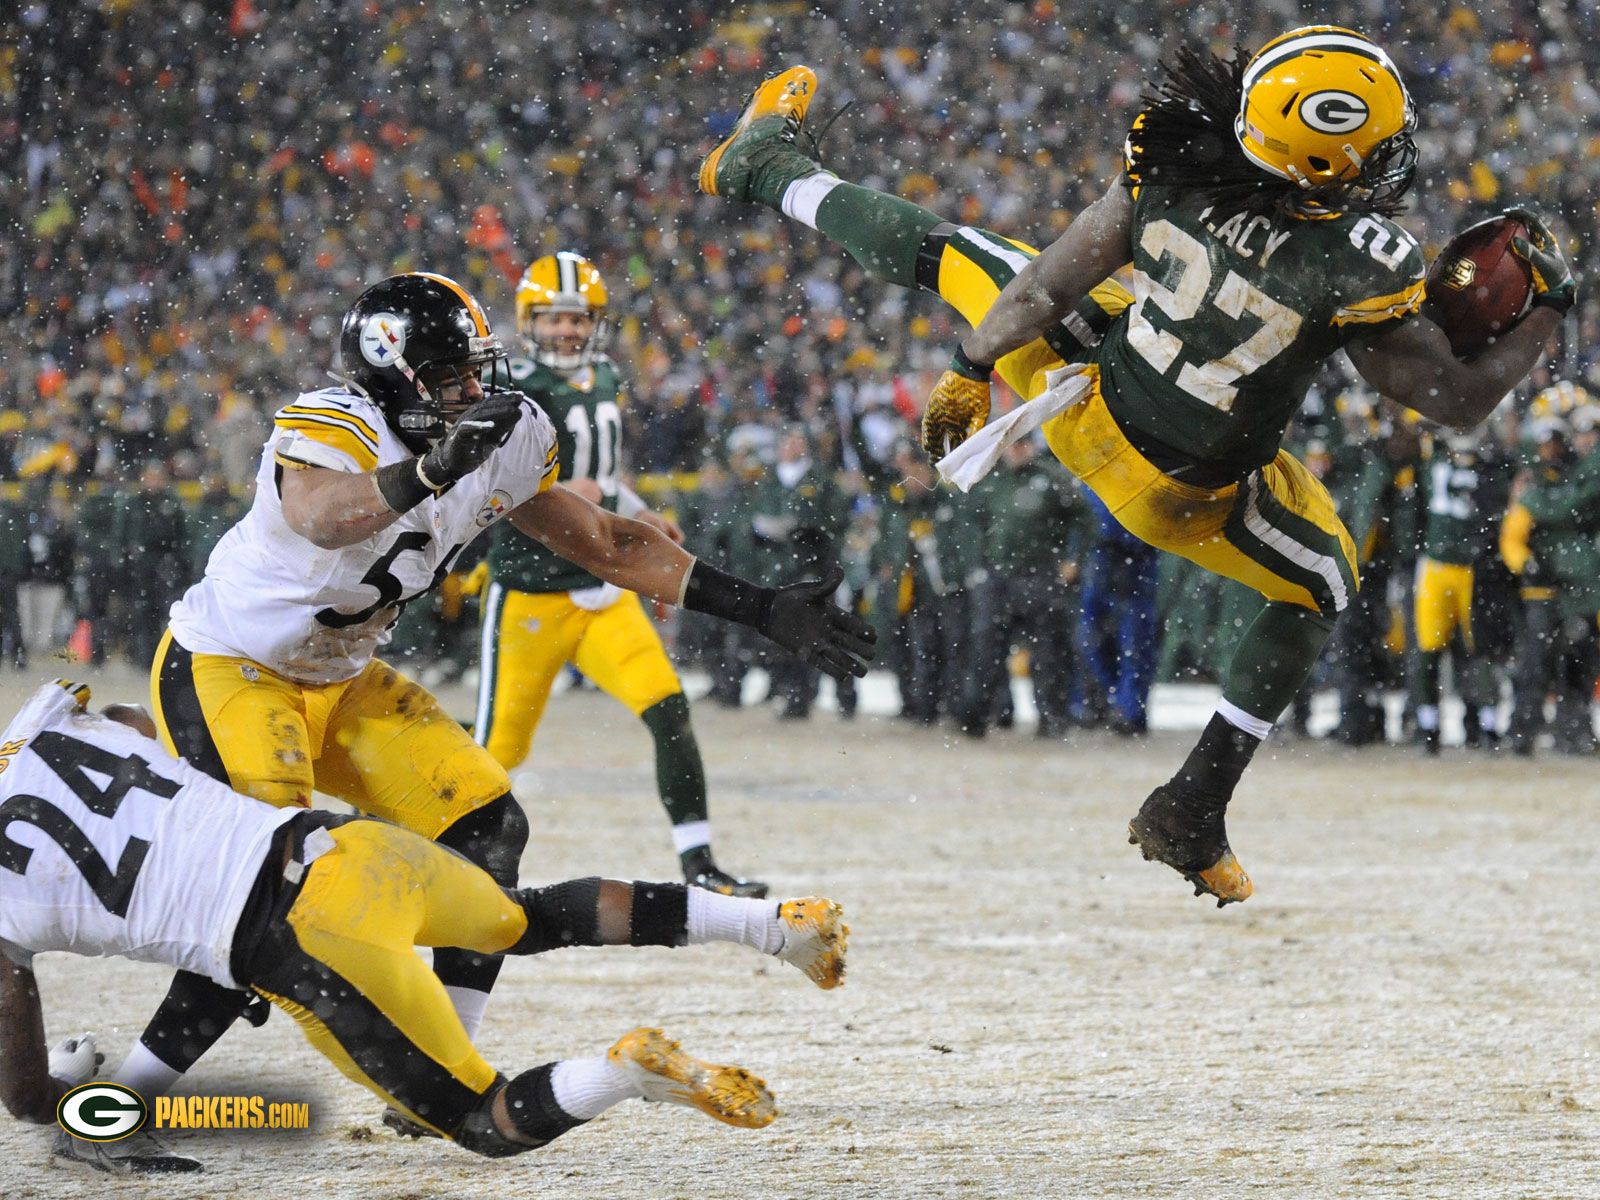 Packers.com Wallpapers 2013 Games